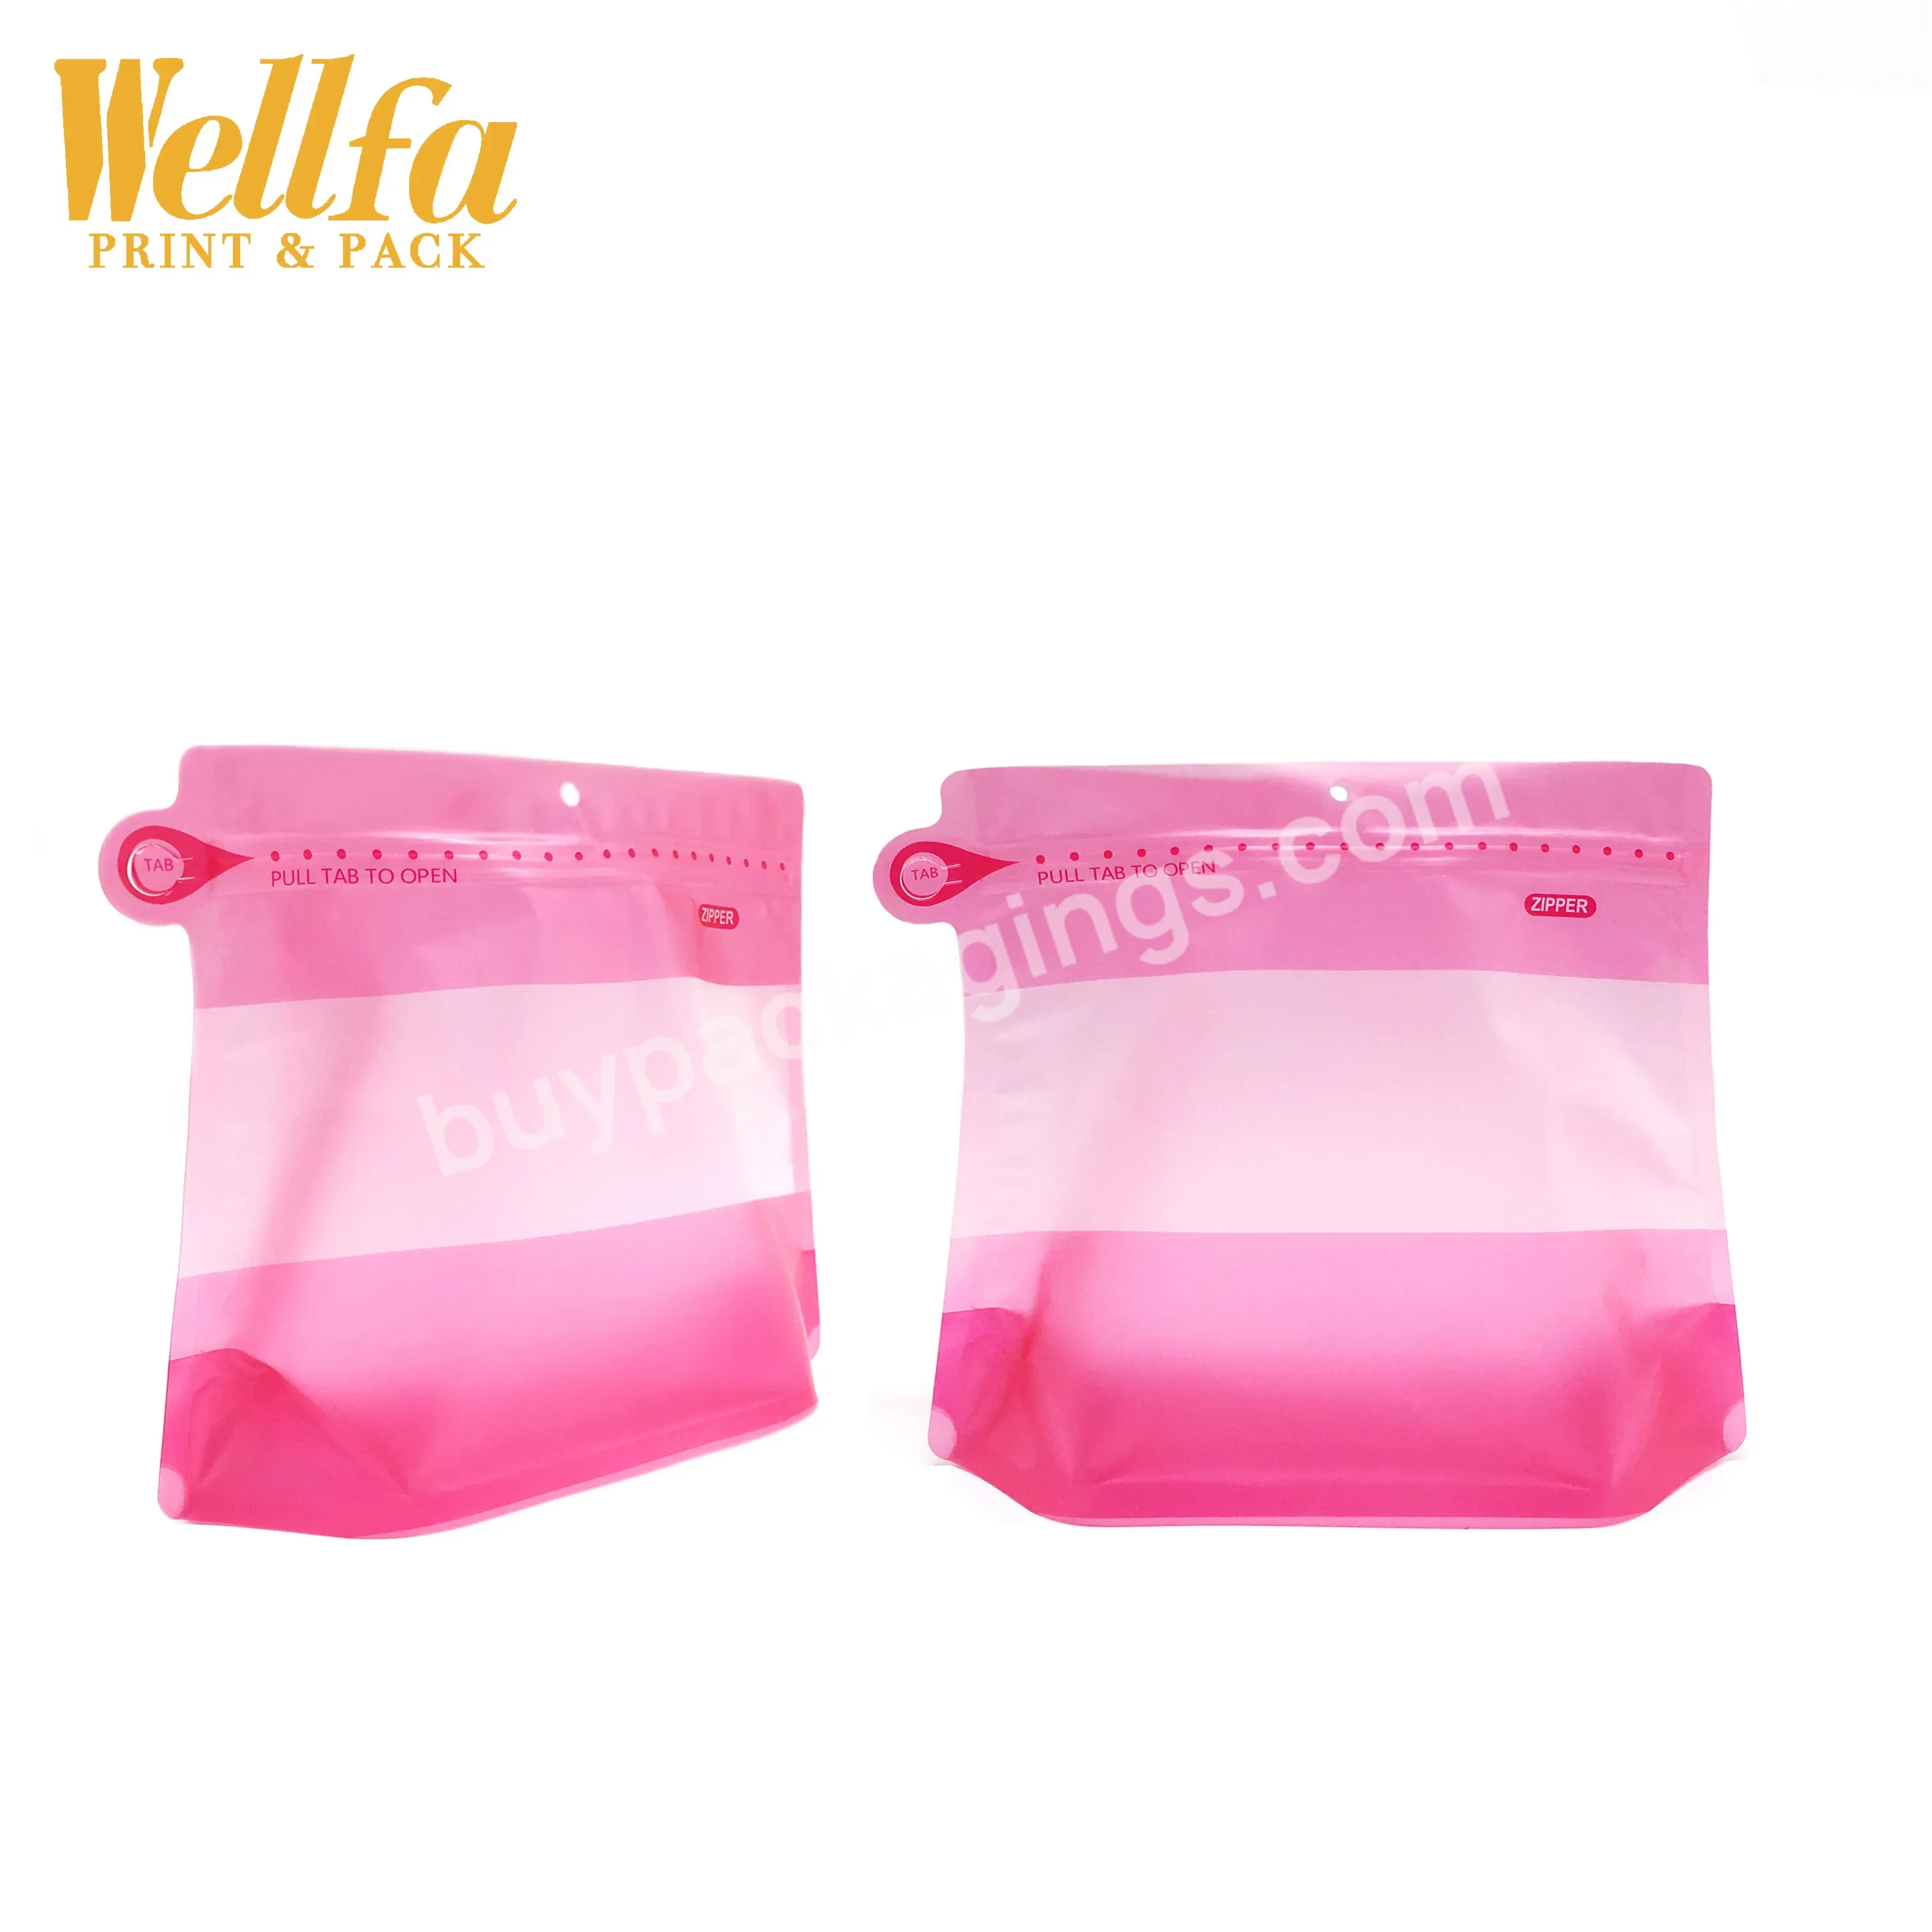 Factory Oem Customized Design Special Shaped Stand Up Food Packaging Pouch Ziplock With Zipper For Coffee Pouch Packaging - Buy Coffee Bags Stand Up Pouch,Coffee Bags Laminated Plastic Bags,Coffee Bags Food Packaging Bag.